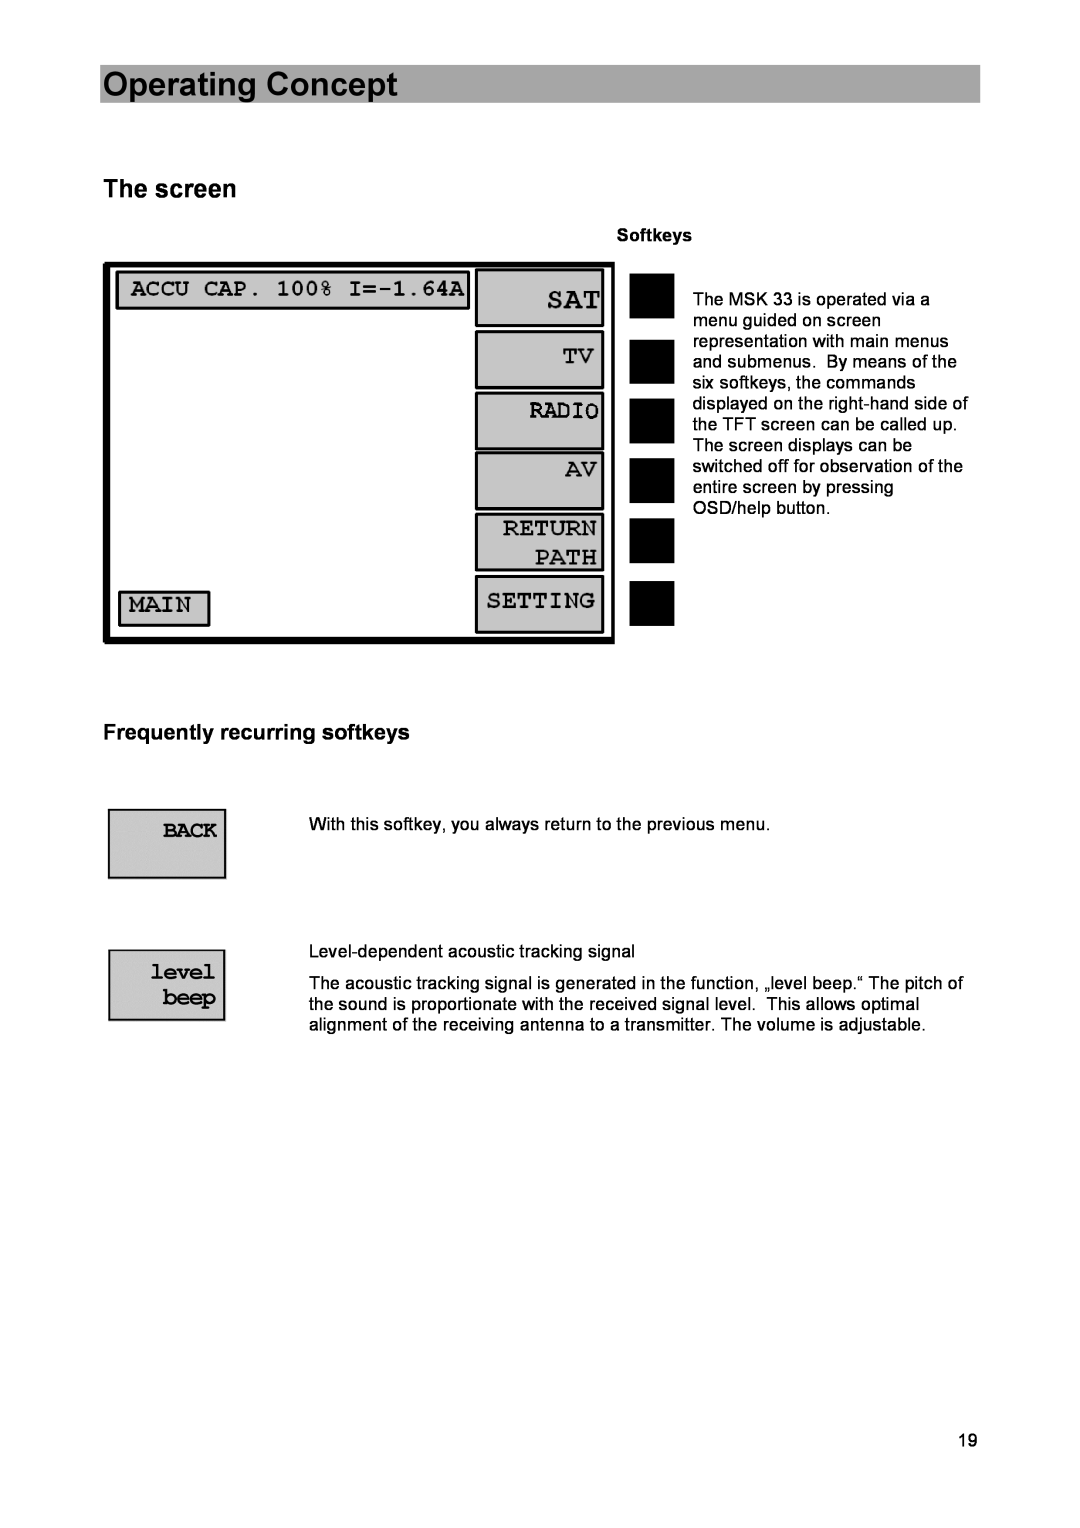 DreamGEAR MSK 33 manual Operating Concept, The screen, Frequently recurring softkeys, Softkeys 